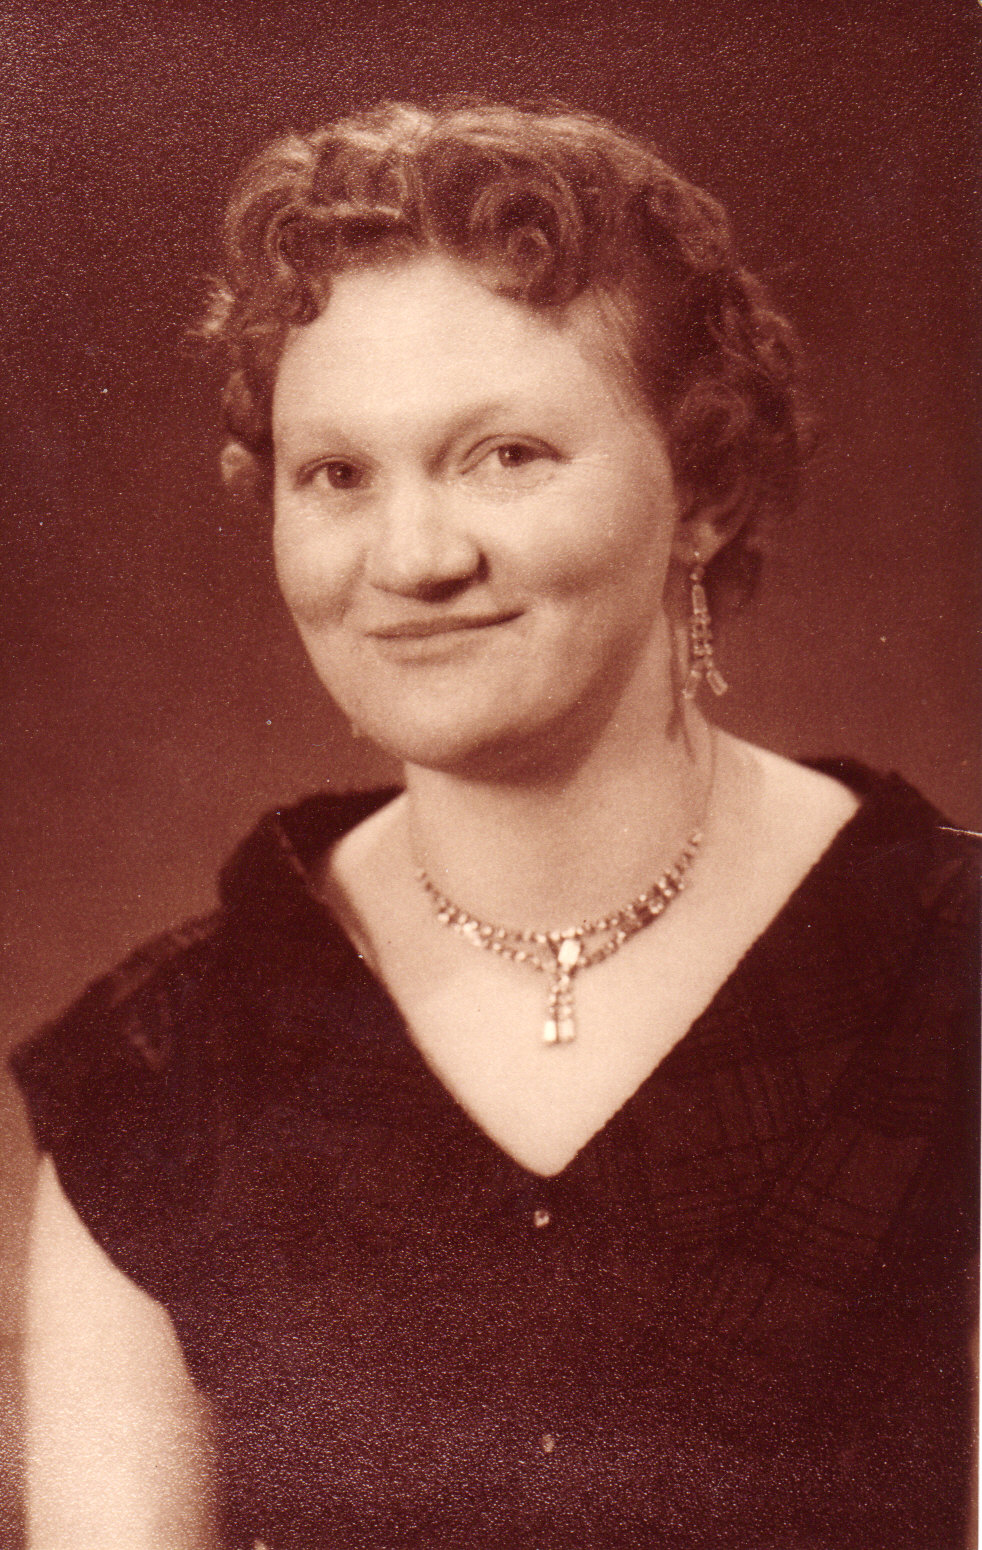 My funny aunt Sophie (1956). View full size.